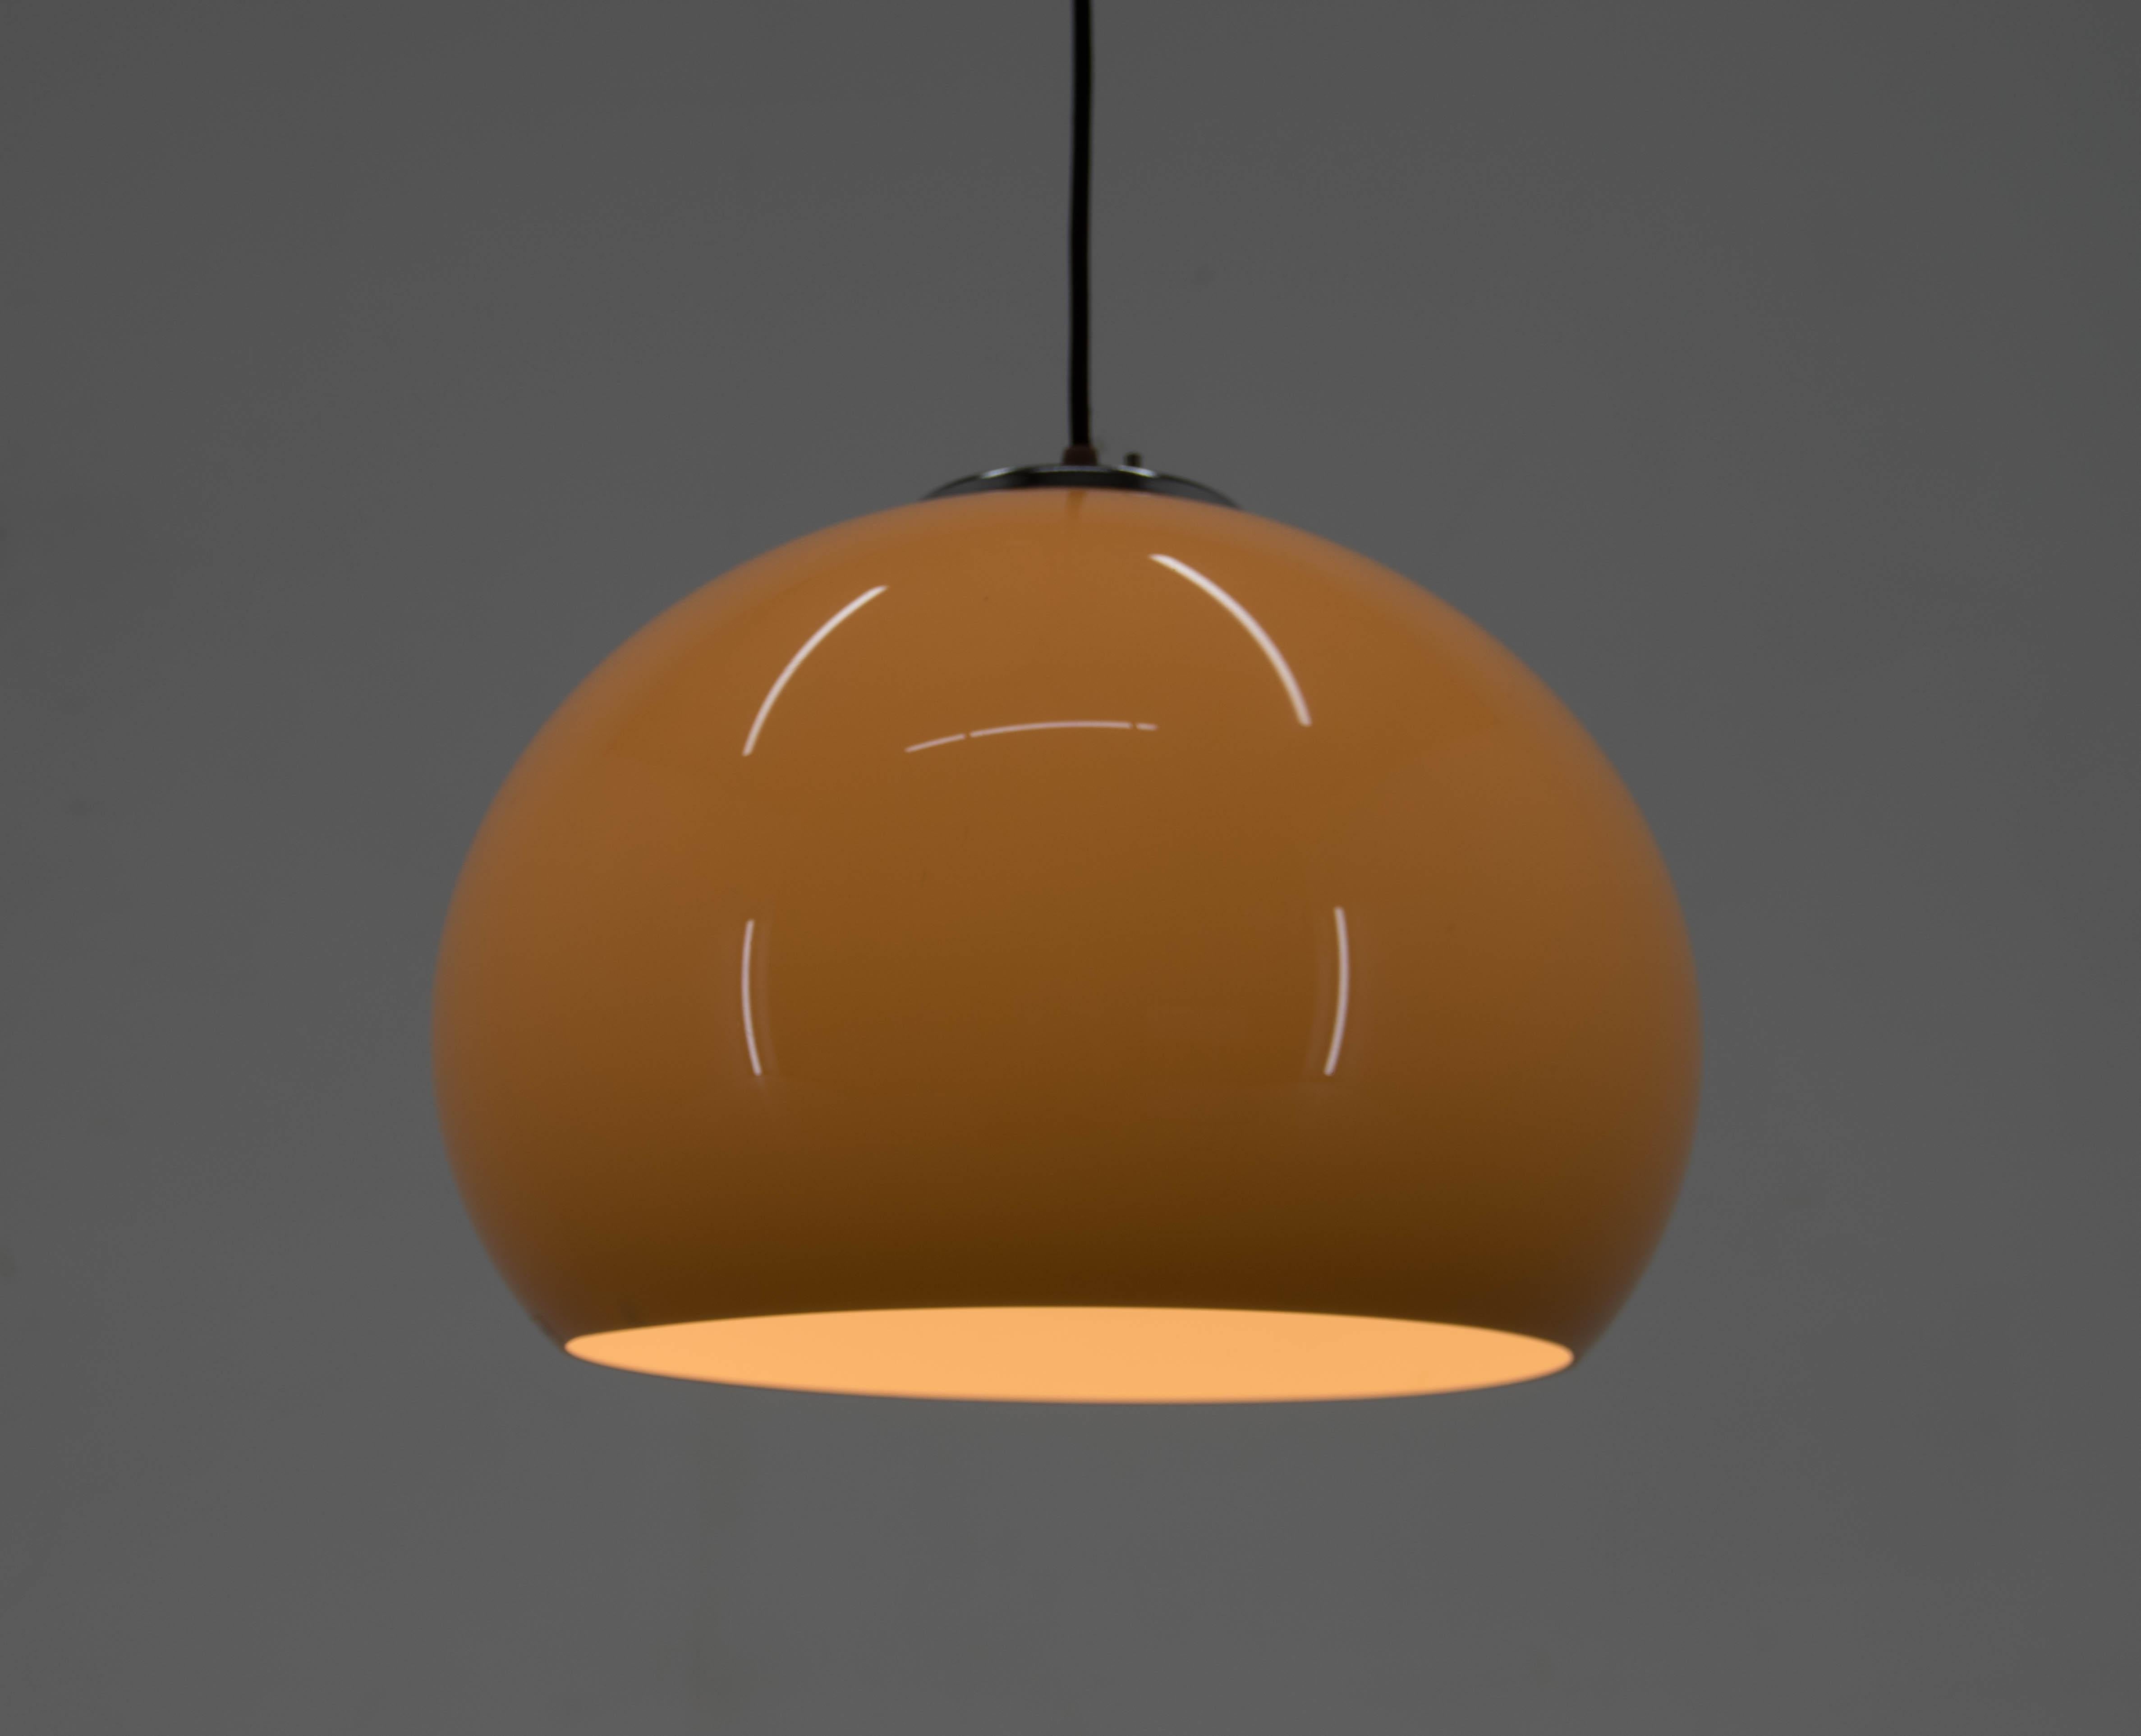 Beige plastic pendant made in Italy in 1970s by Meblo.
Labeled.
Rewired: 1x60W, E25-E27 bulb
US wiring compatible
 